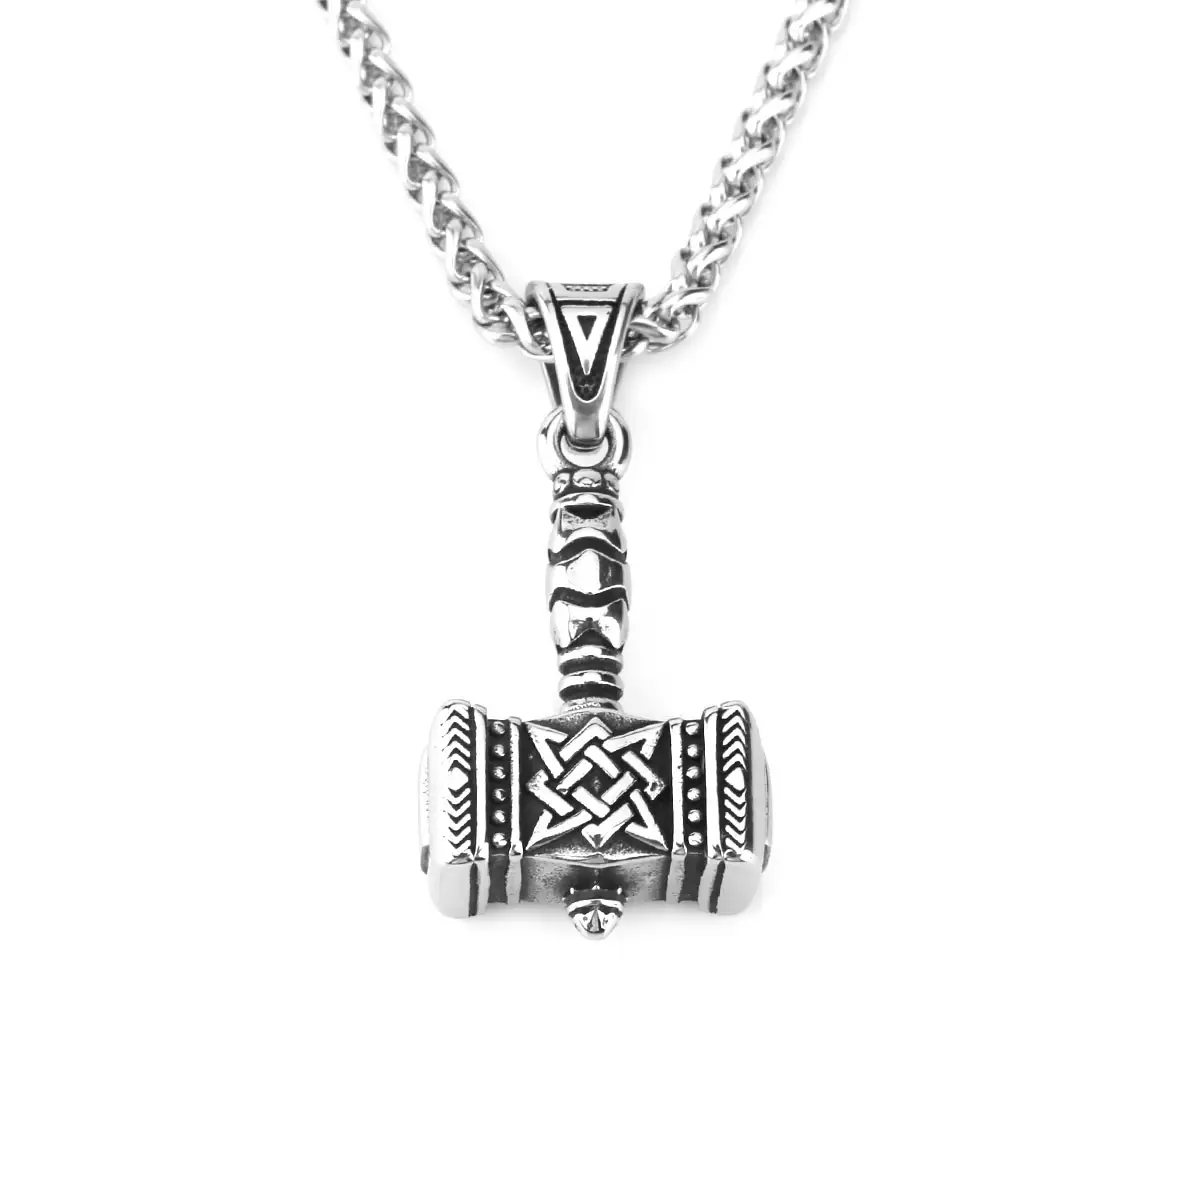 Nordic Thor's Hammer Men's Pendant 316L Stainless Steel Domineering Celtic Knot Amulet charms for jewelry making anchor pendant